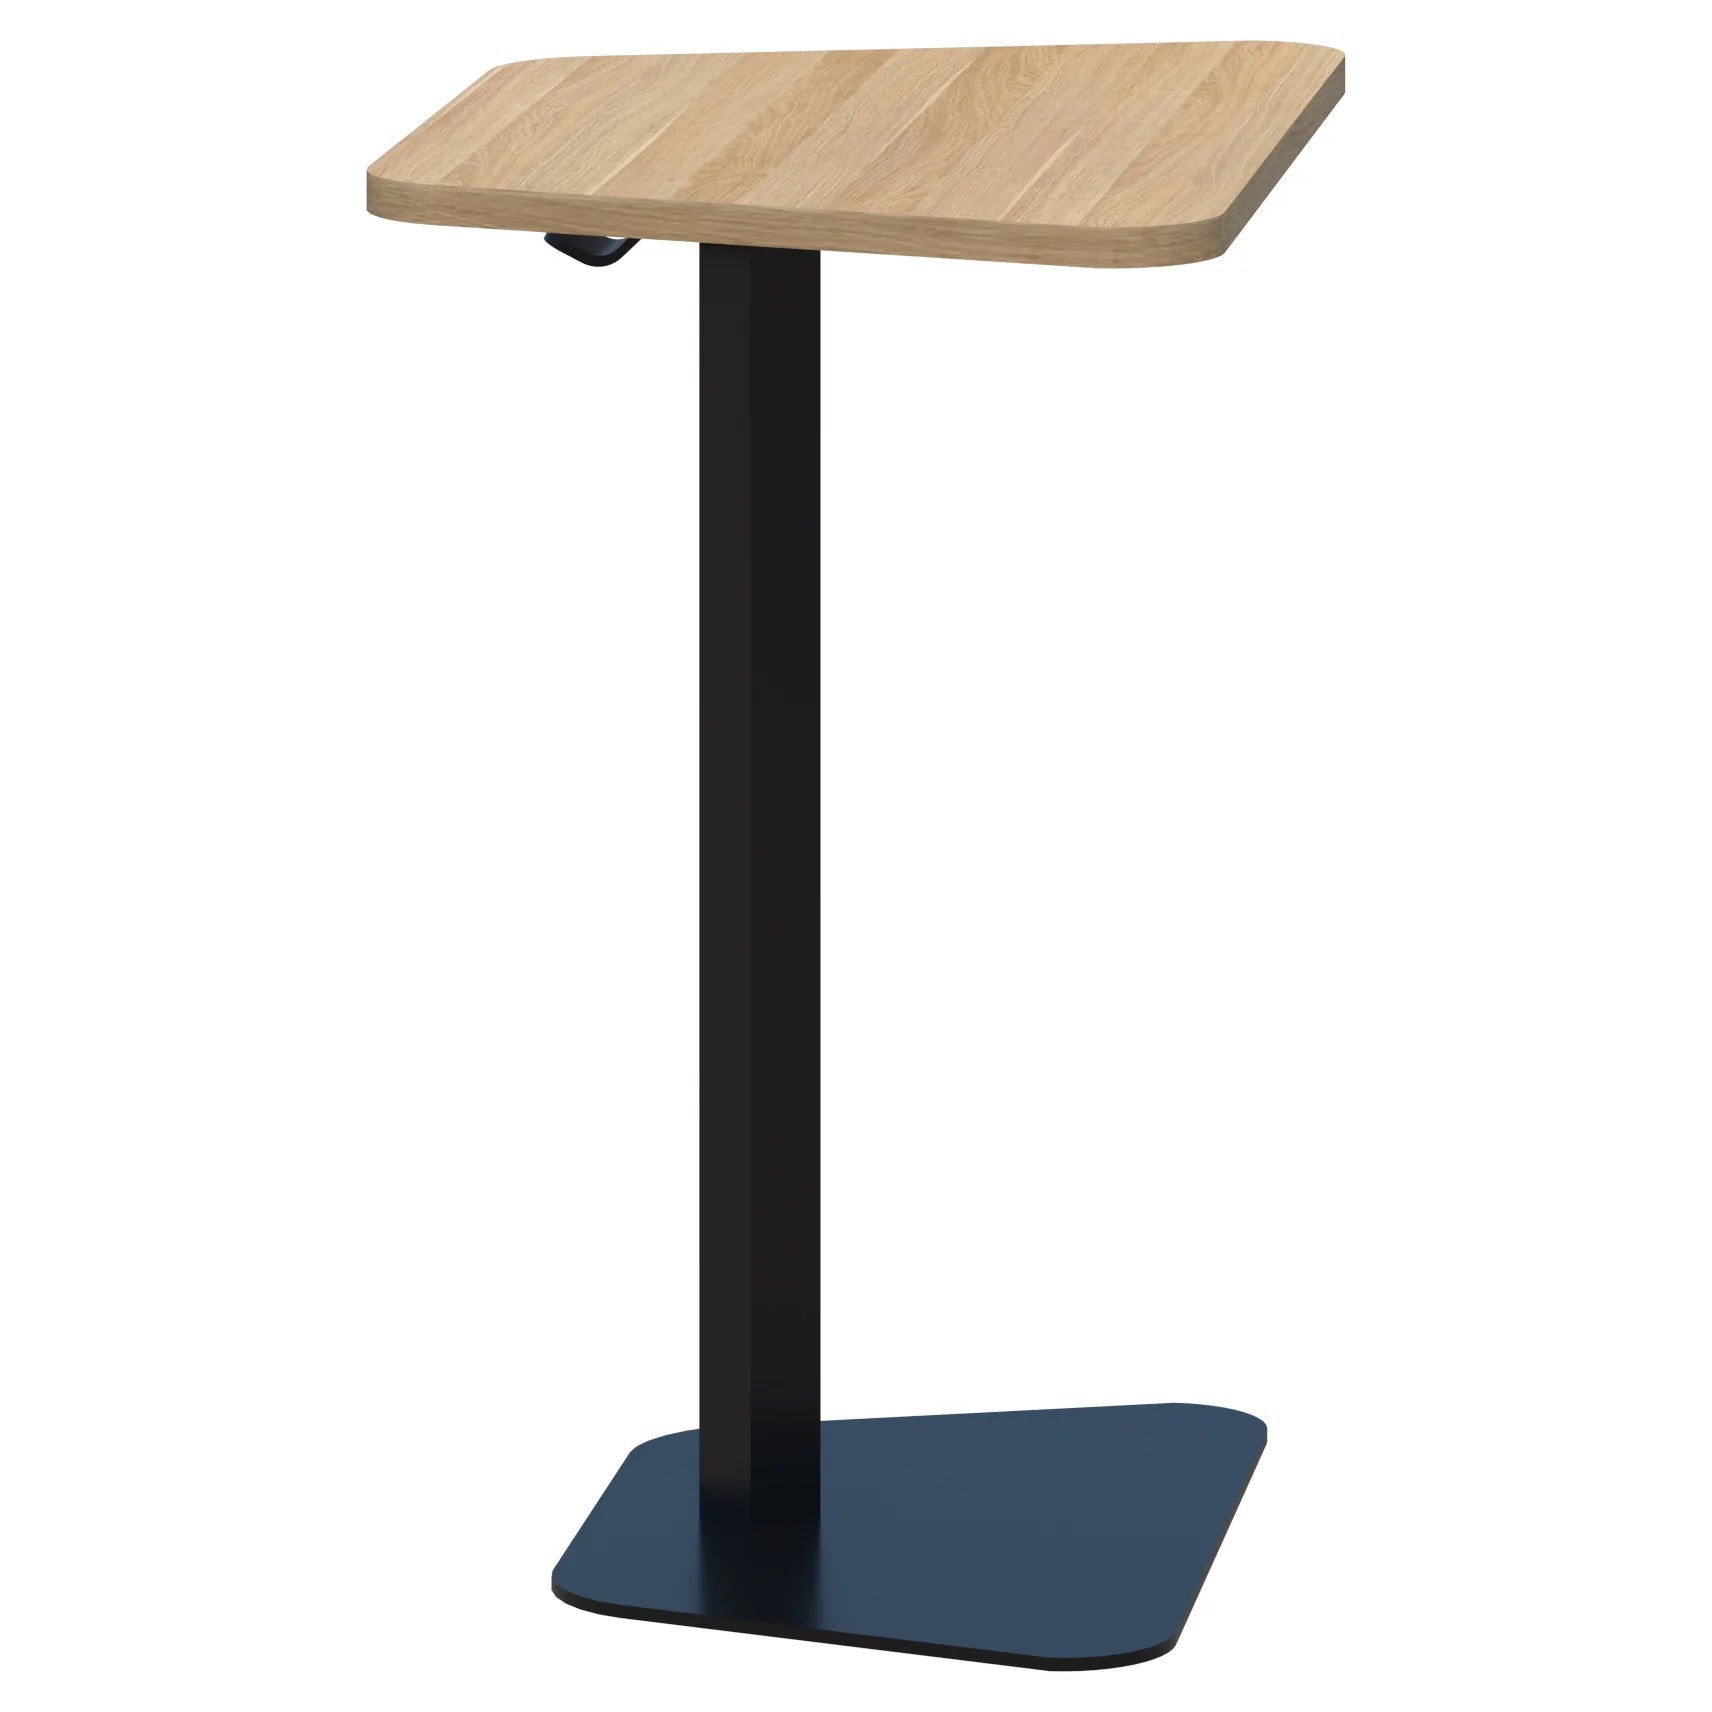 Memo laptop table with trapezium shaped top in classic oak and black pedestal base.